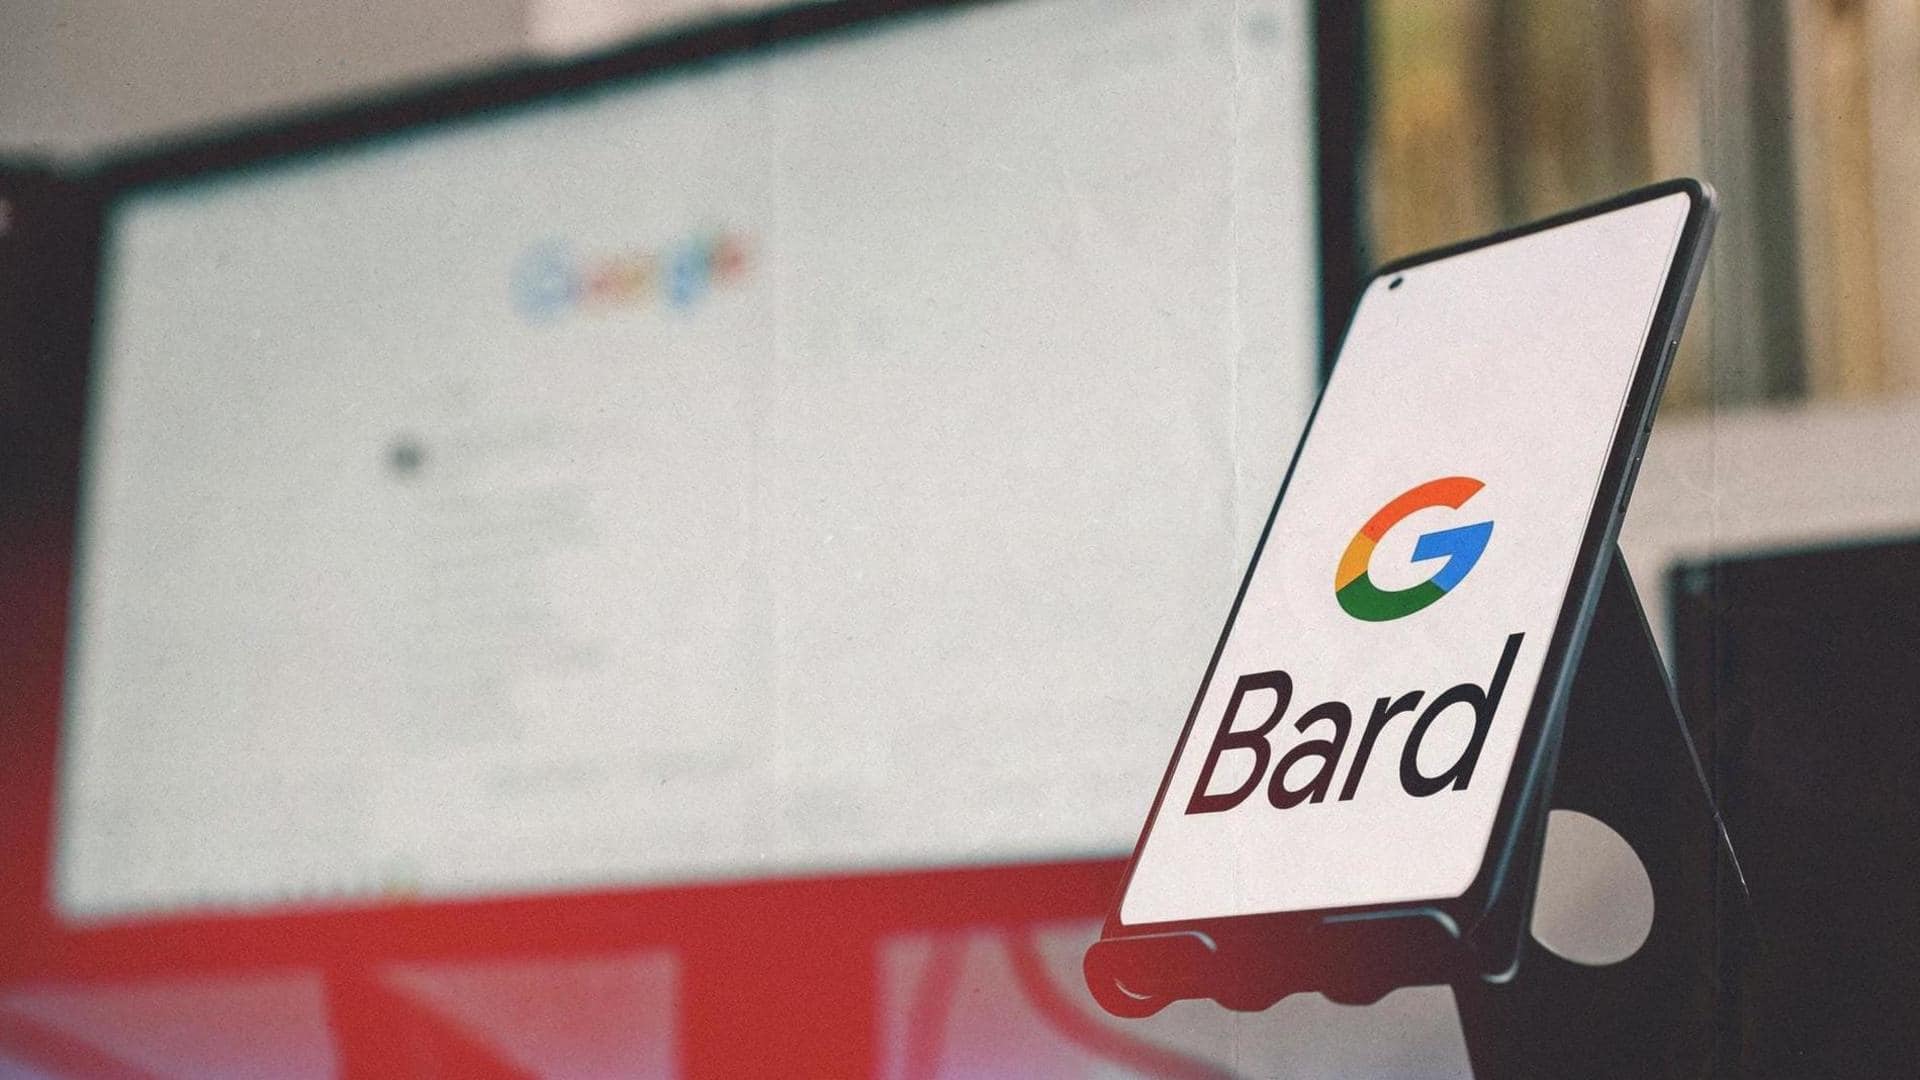 Google Bard finally arrives in EU with ability to talk